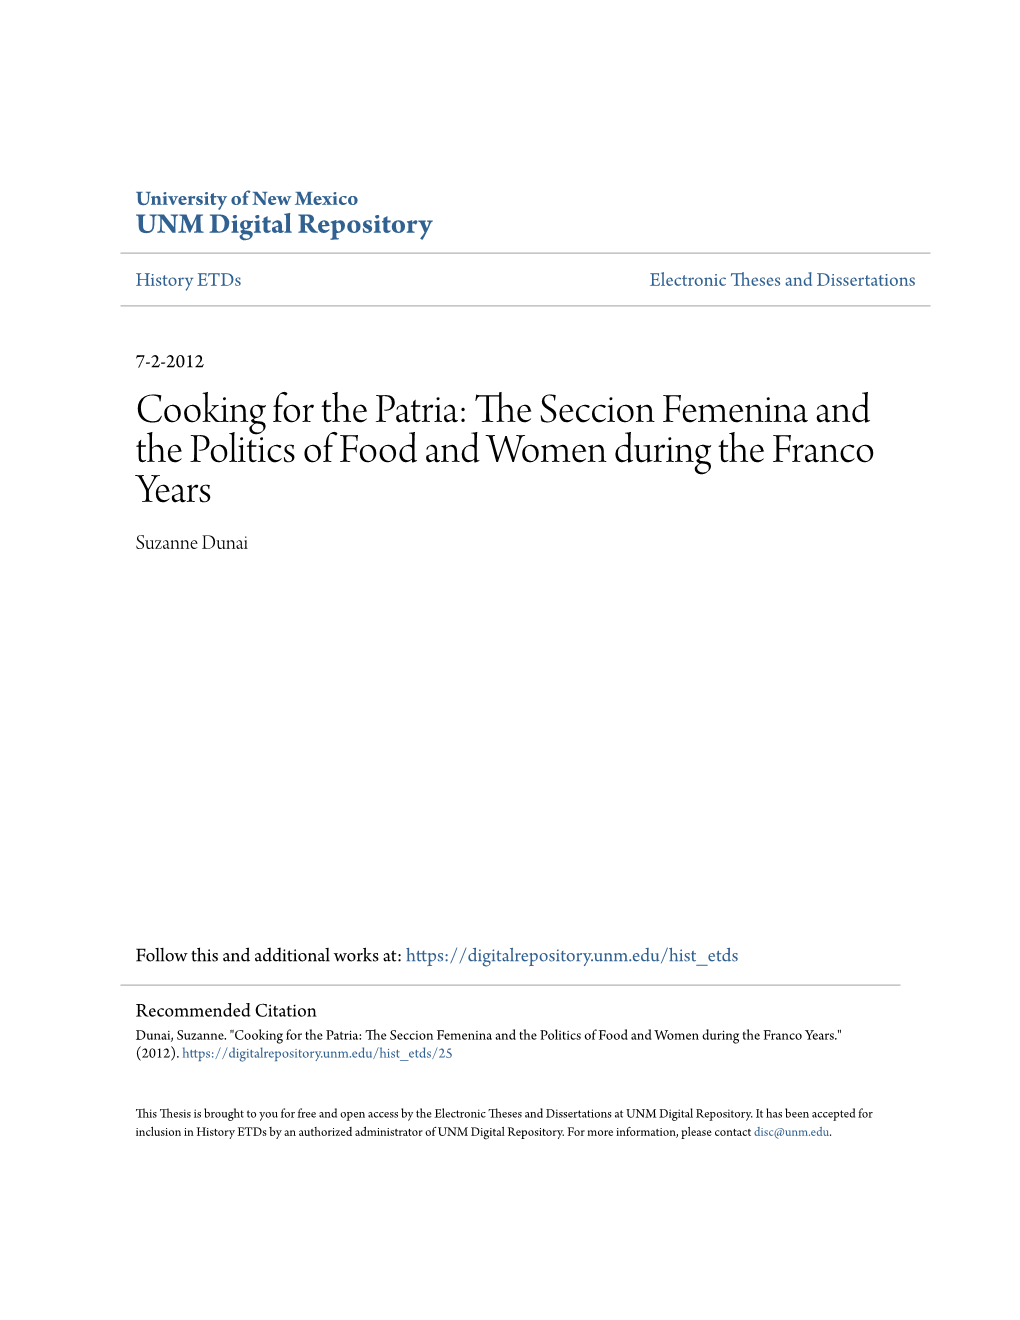 Cooking for the Patria: the Seccion Femenina and the Politics of Food and Women During the Franco Years